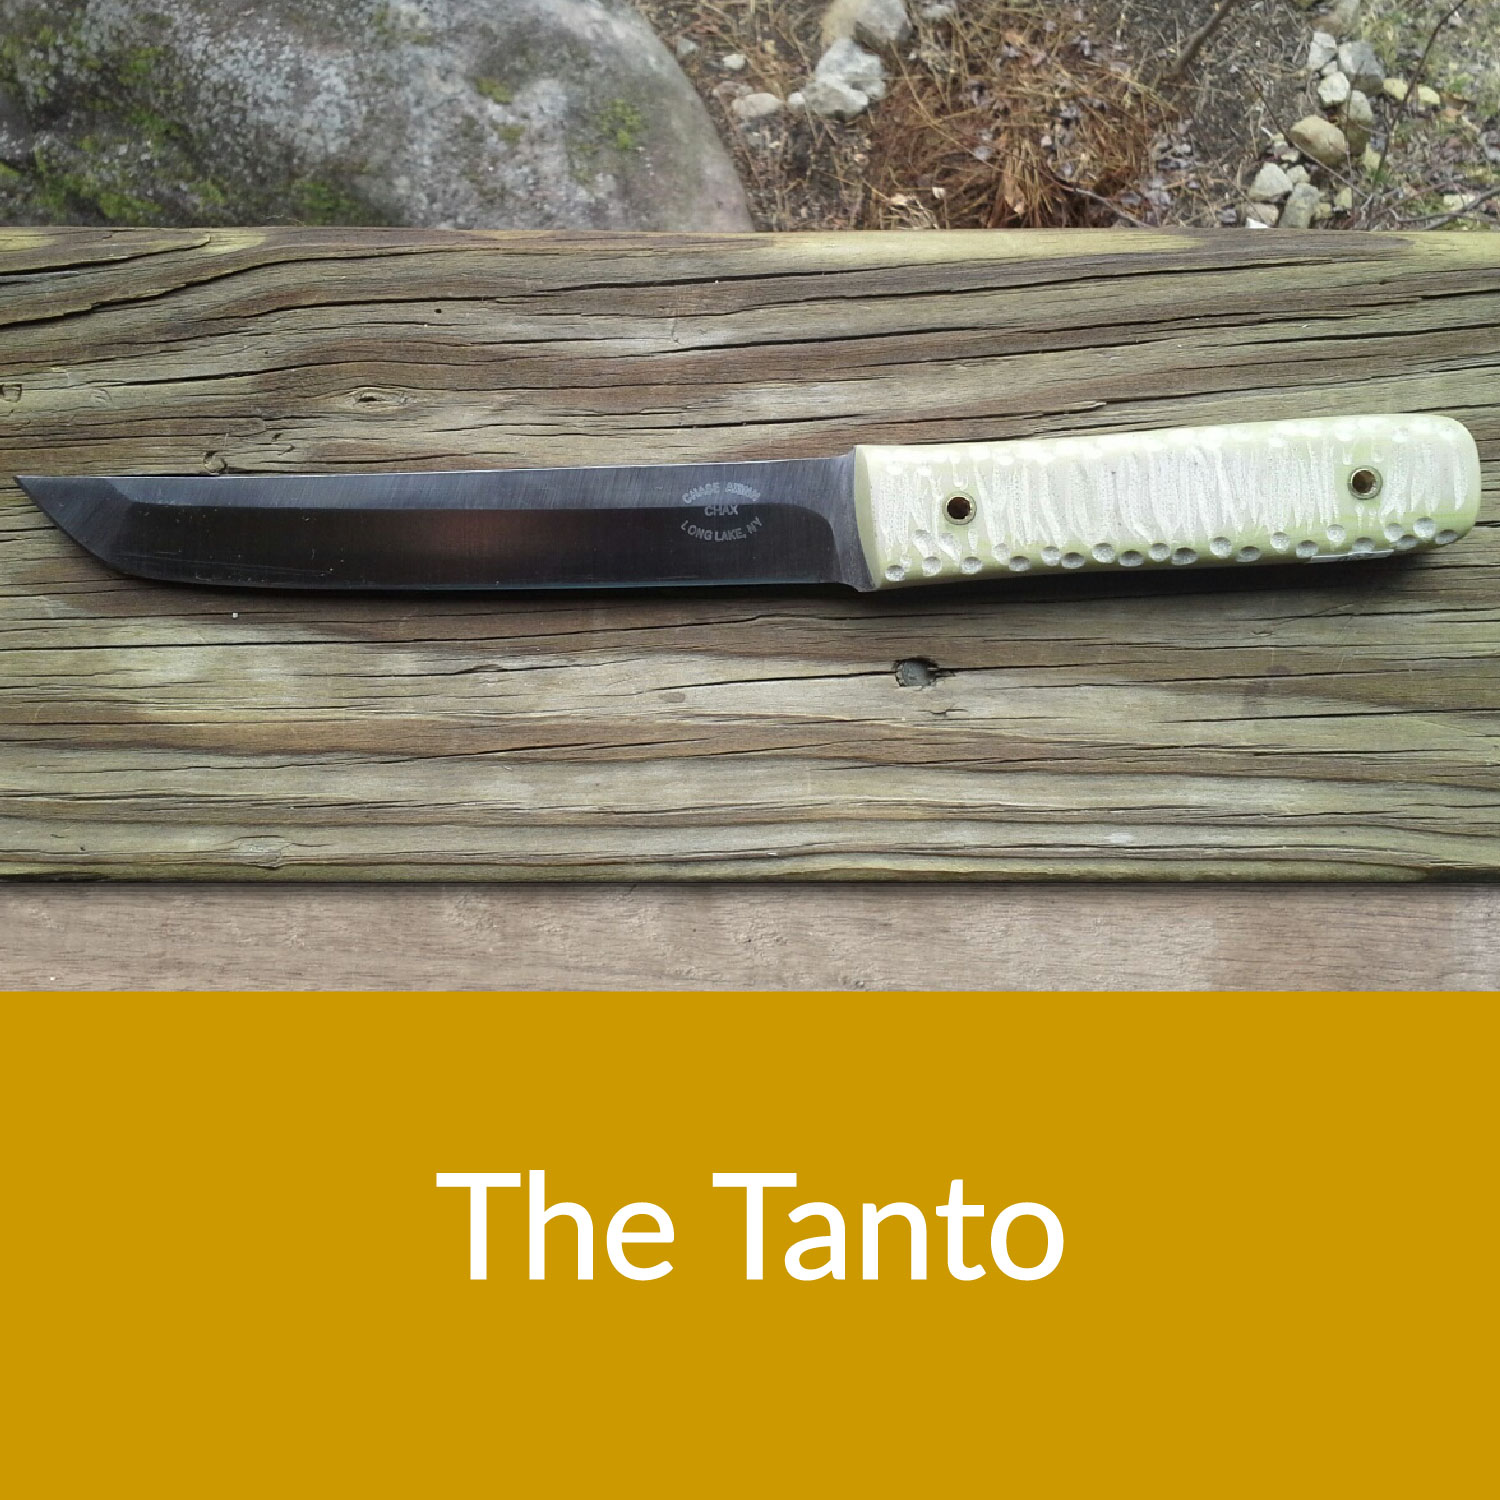 The Tanto